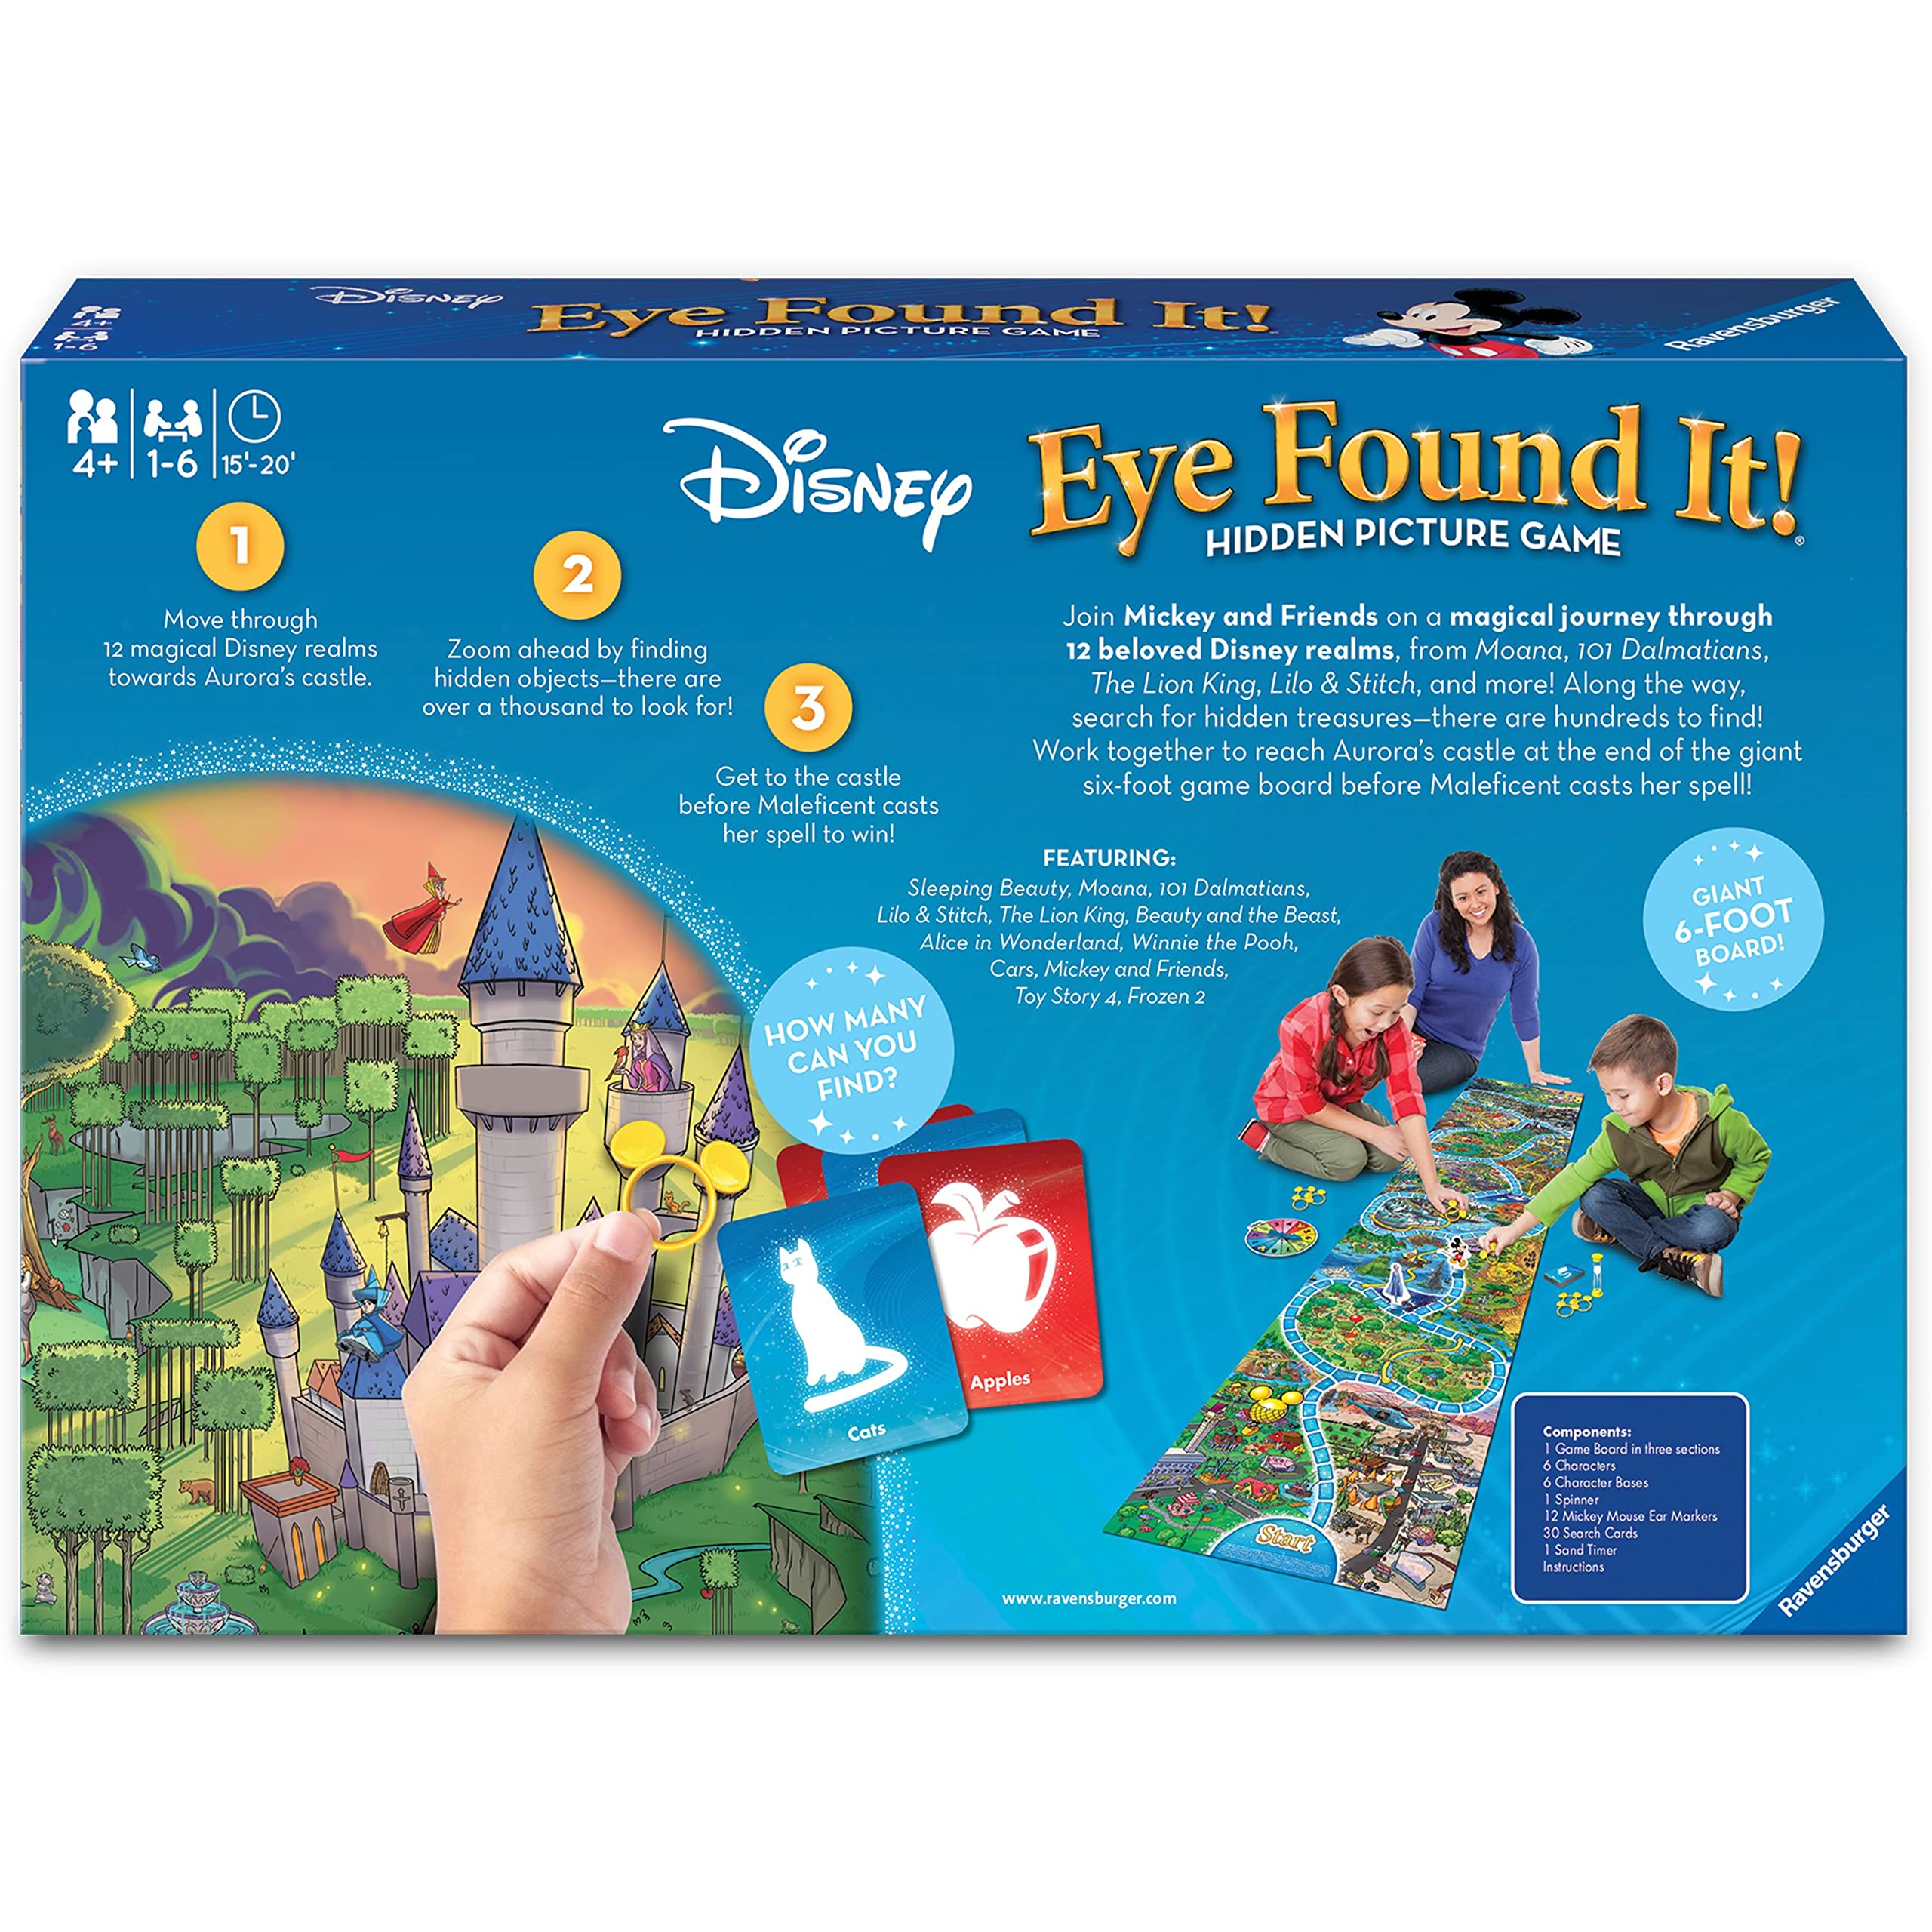 Ravensburger World of Disney Eye Found It Board Game for Boys and Girls Ages 4 and Up - A Fun Family Game You'll Want to Play Again and Again,6 players